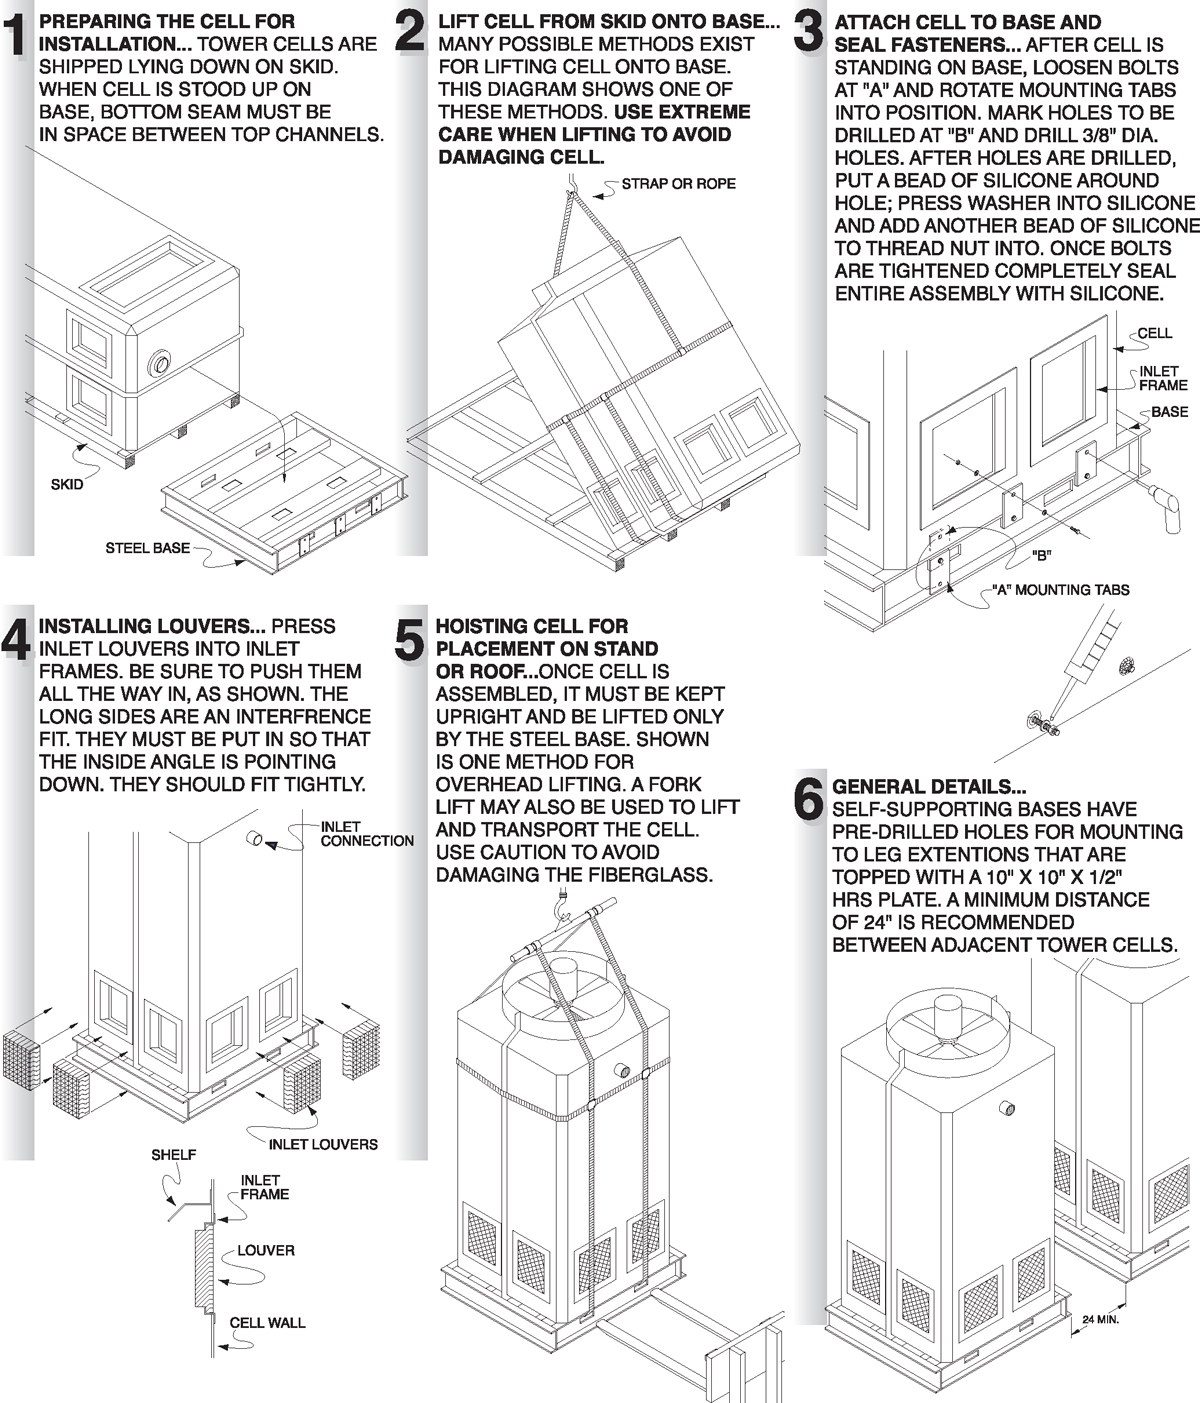 Site Assembly and Rigging Instructions